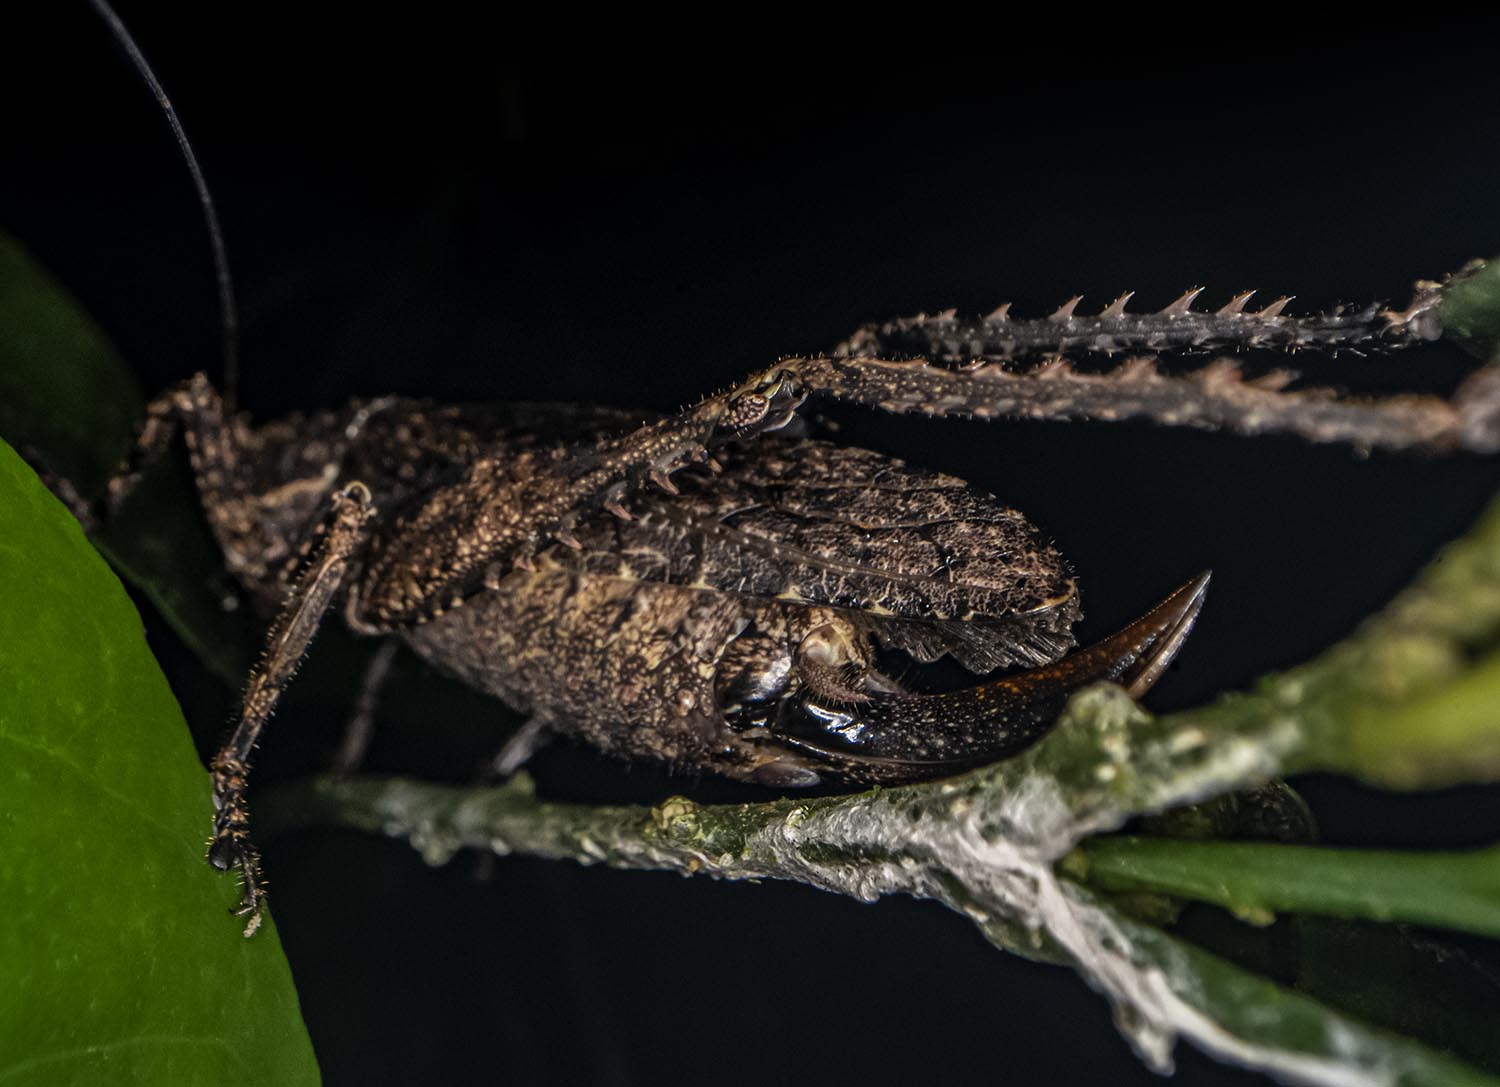 A close up of a grasshopper-like insect's spiny legs